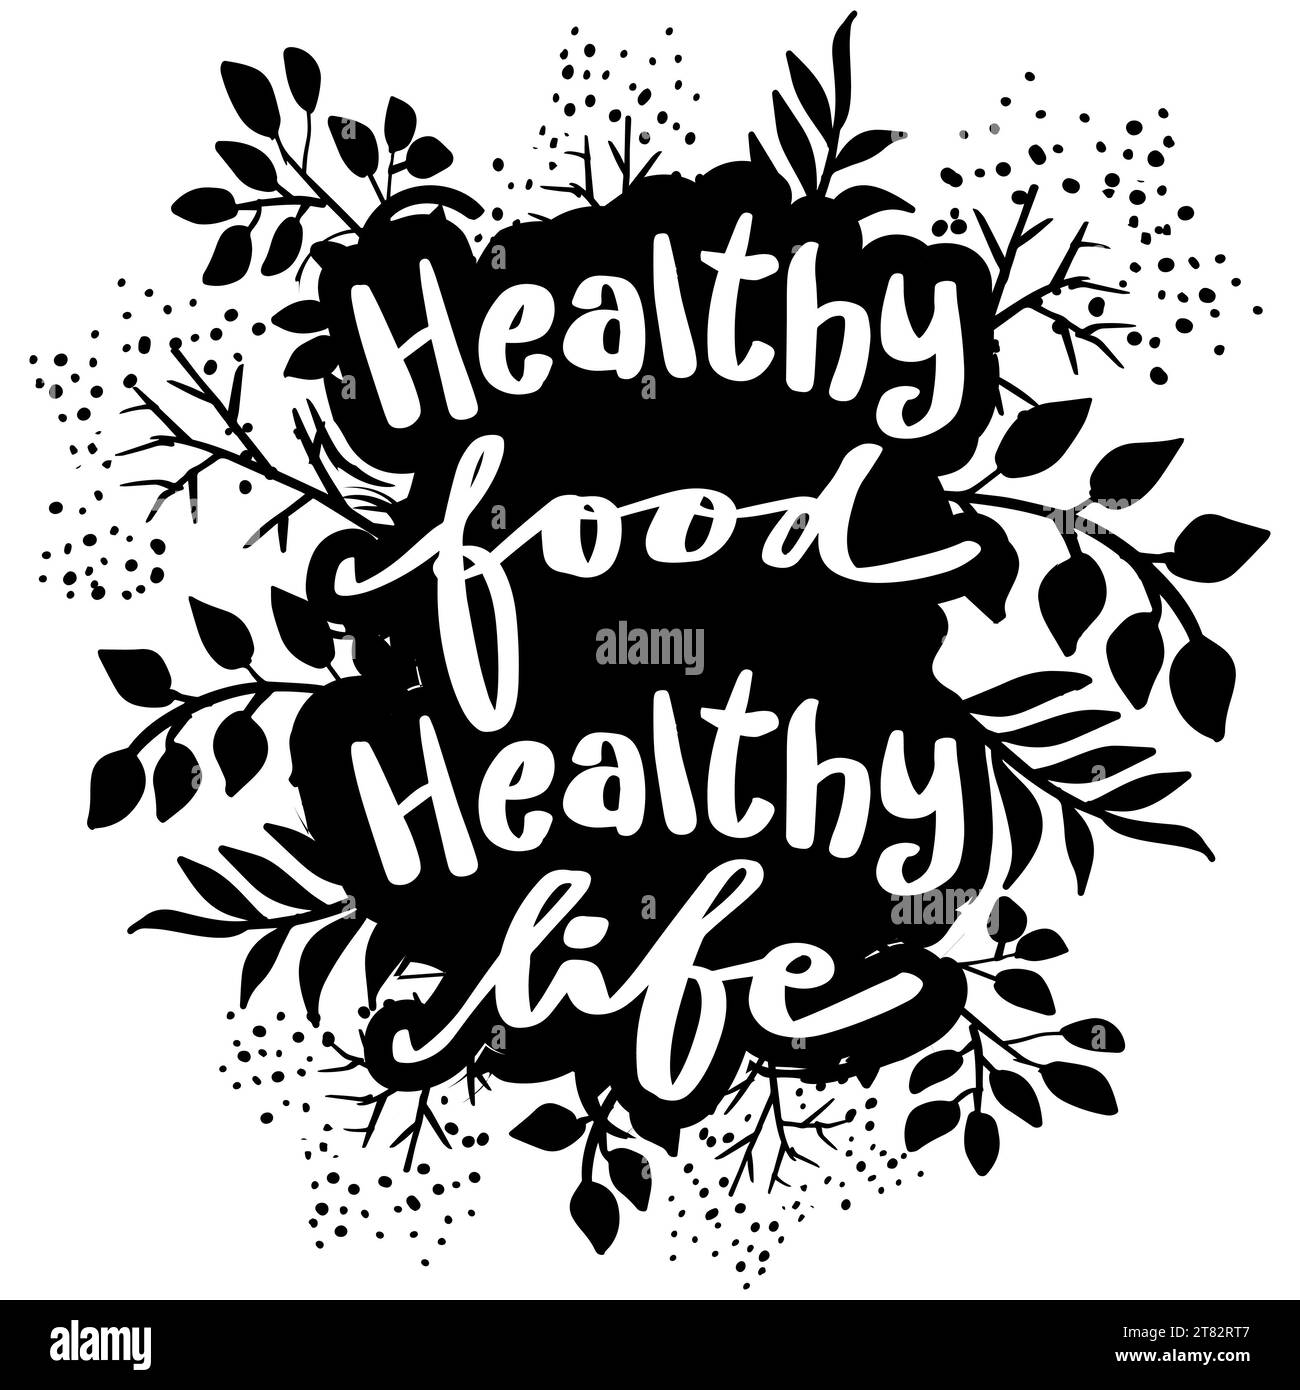 Healthy food, healthy life lettering. Motivational quote. Stock Photo